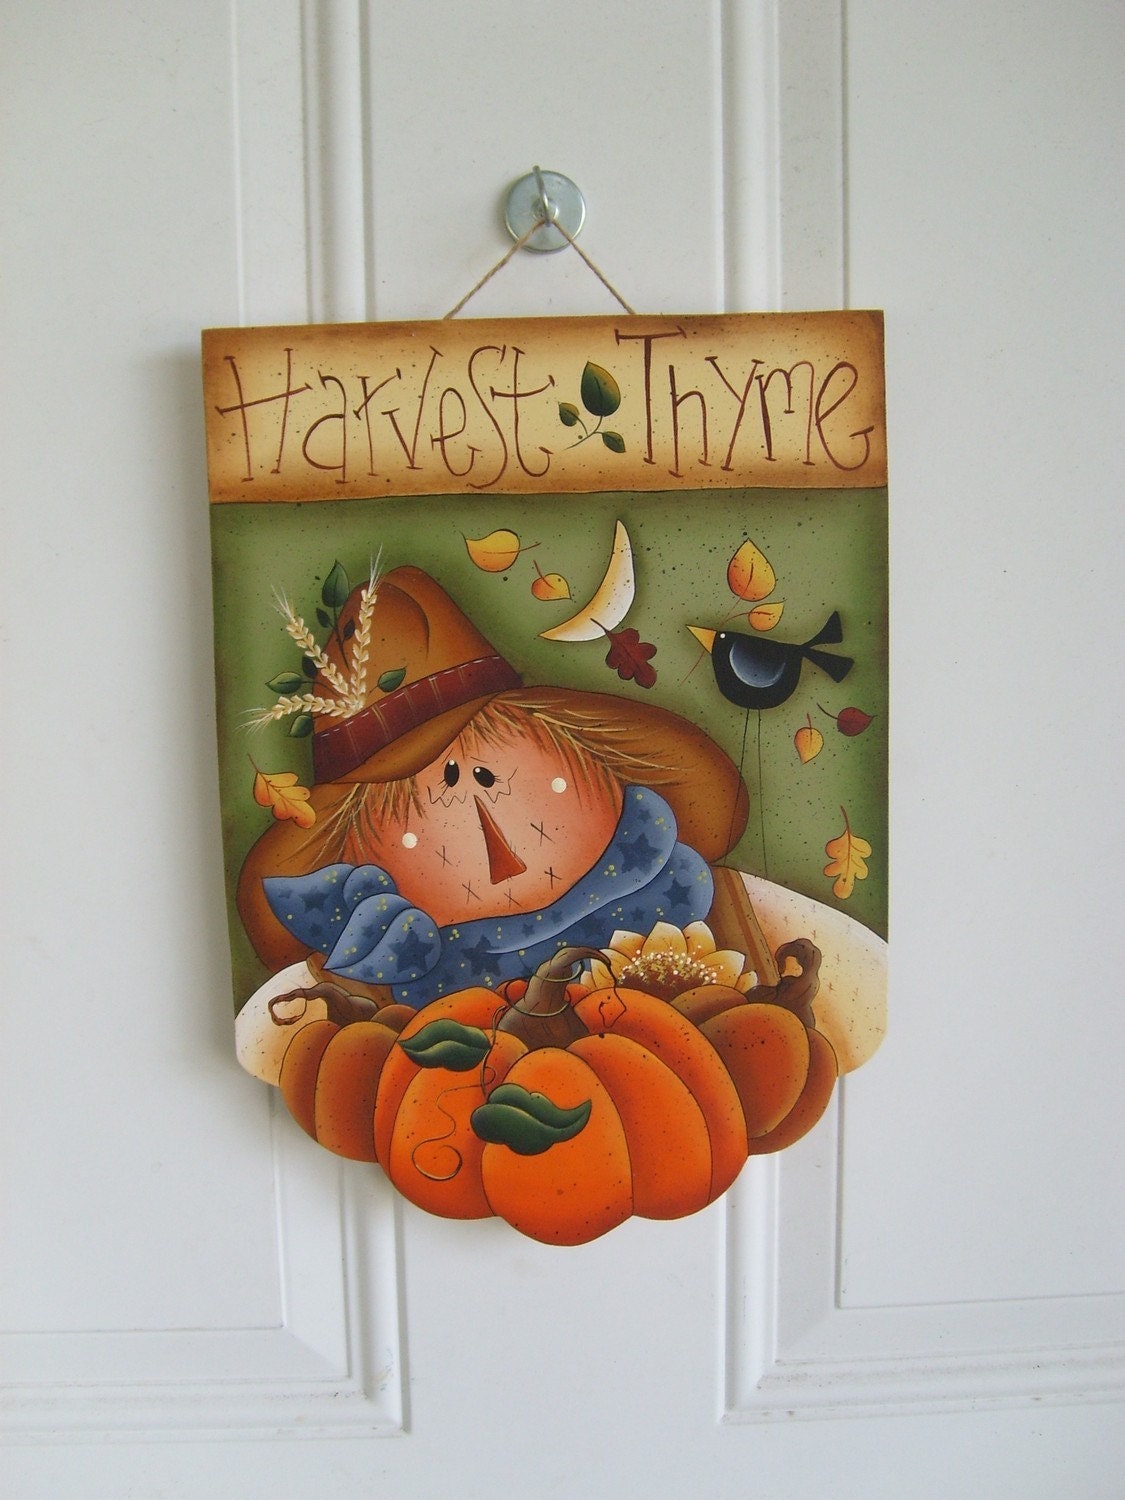 Harvest Thyme Scarecrow, Primitive Handpainted Wood Sign, Home Decor, Thanksgiving, Fall - DAWNSPAINTING